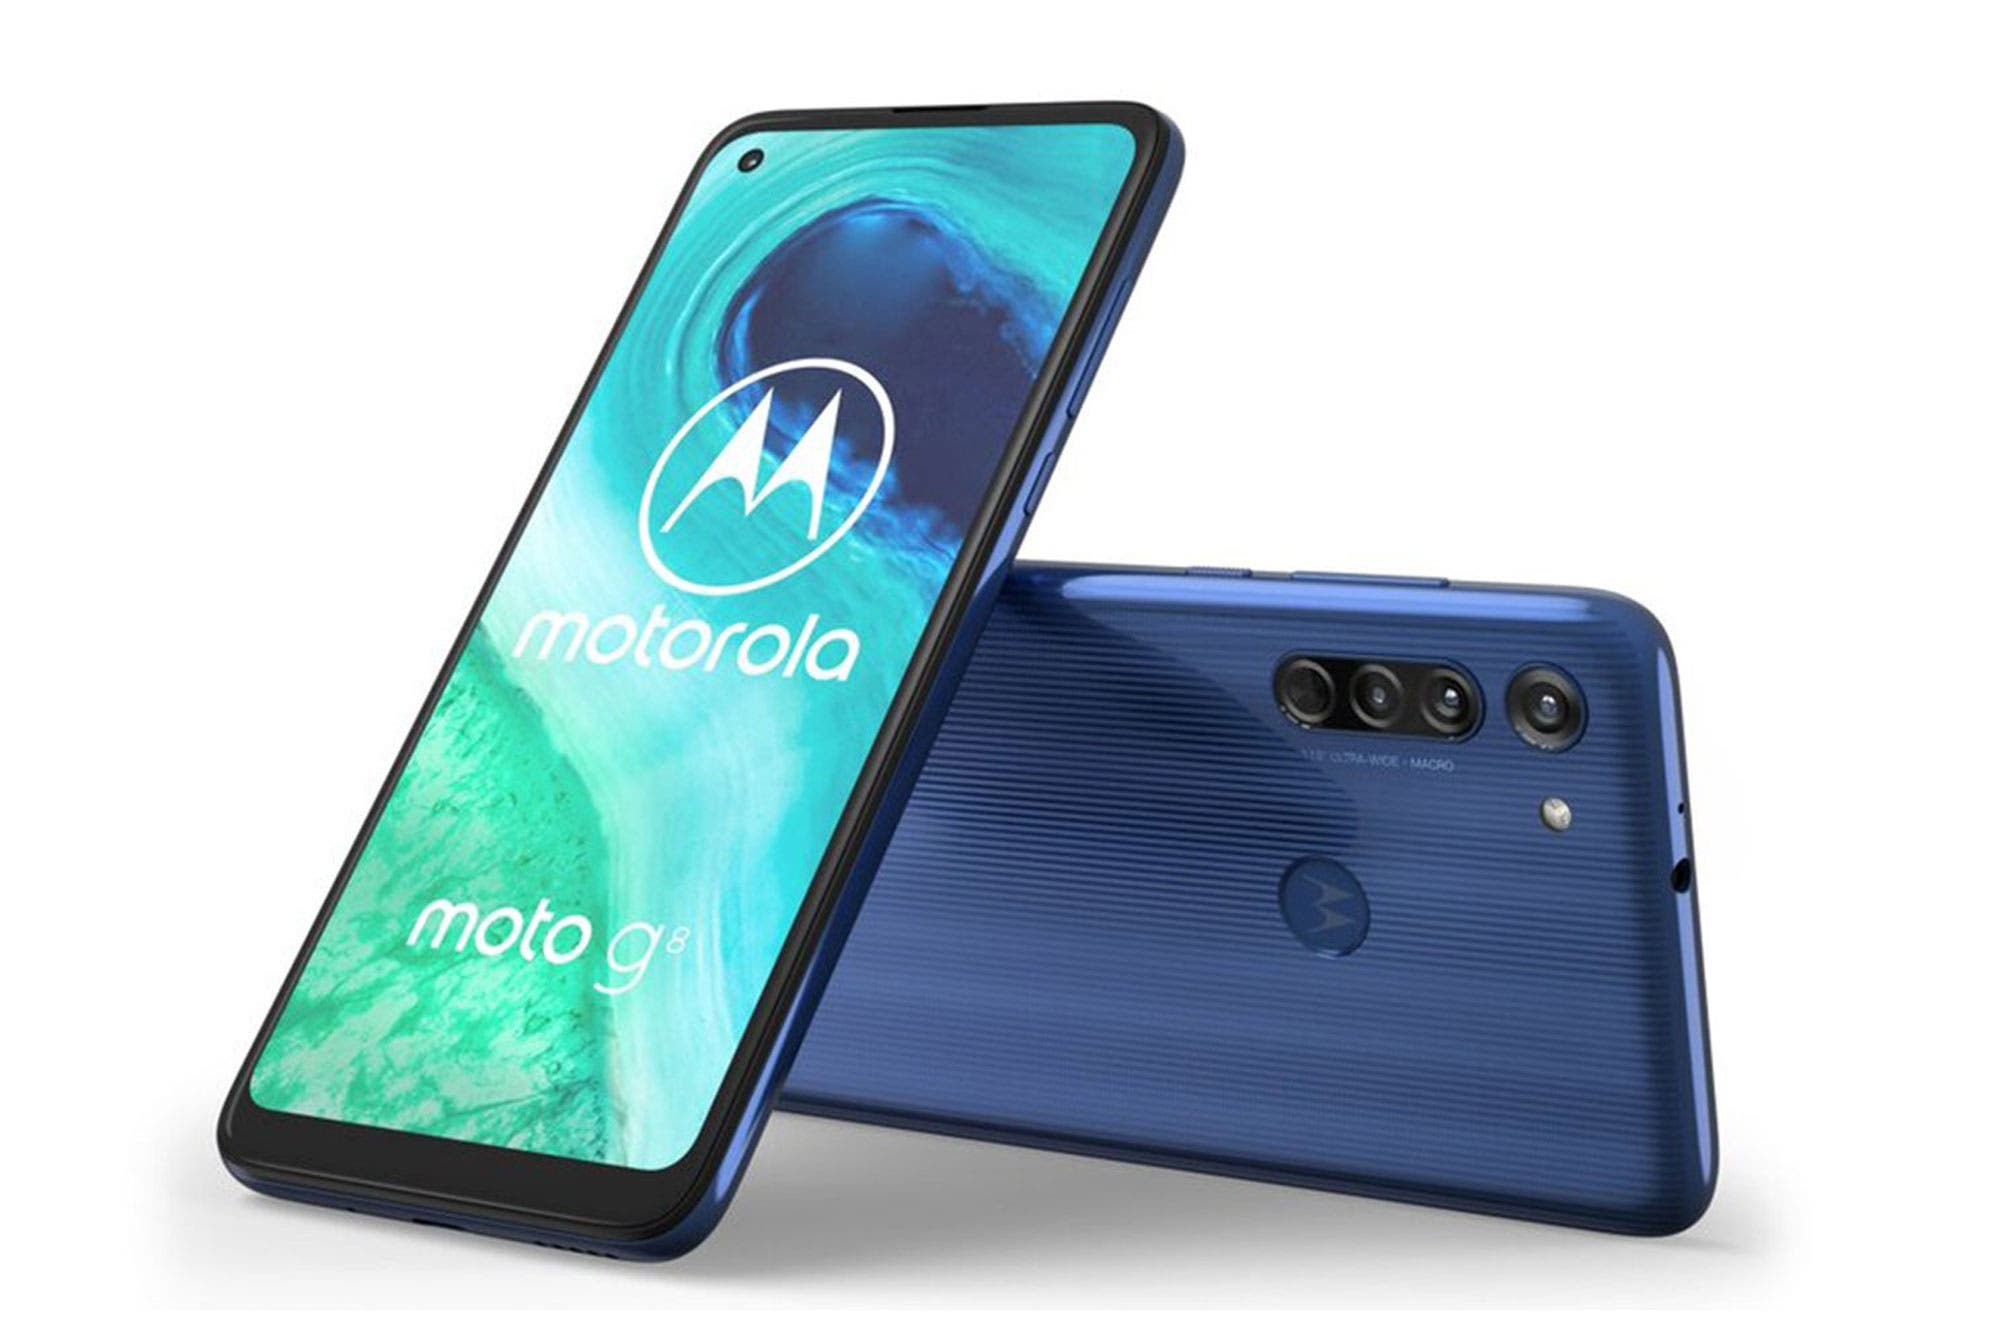 Moto G8: Motorola announced its new mid-range phone equipped with triple rear camera